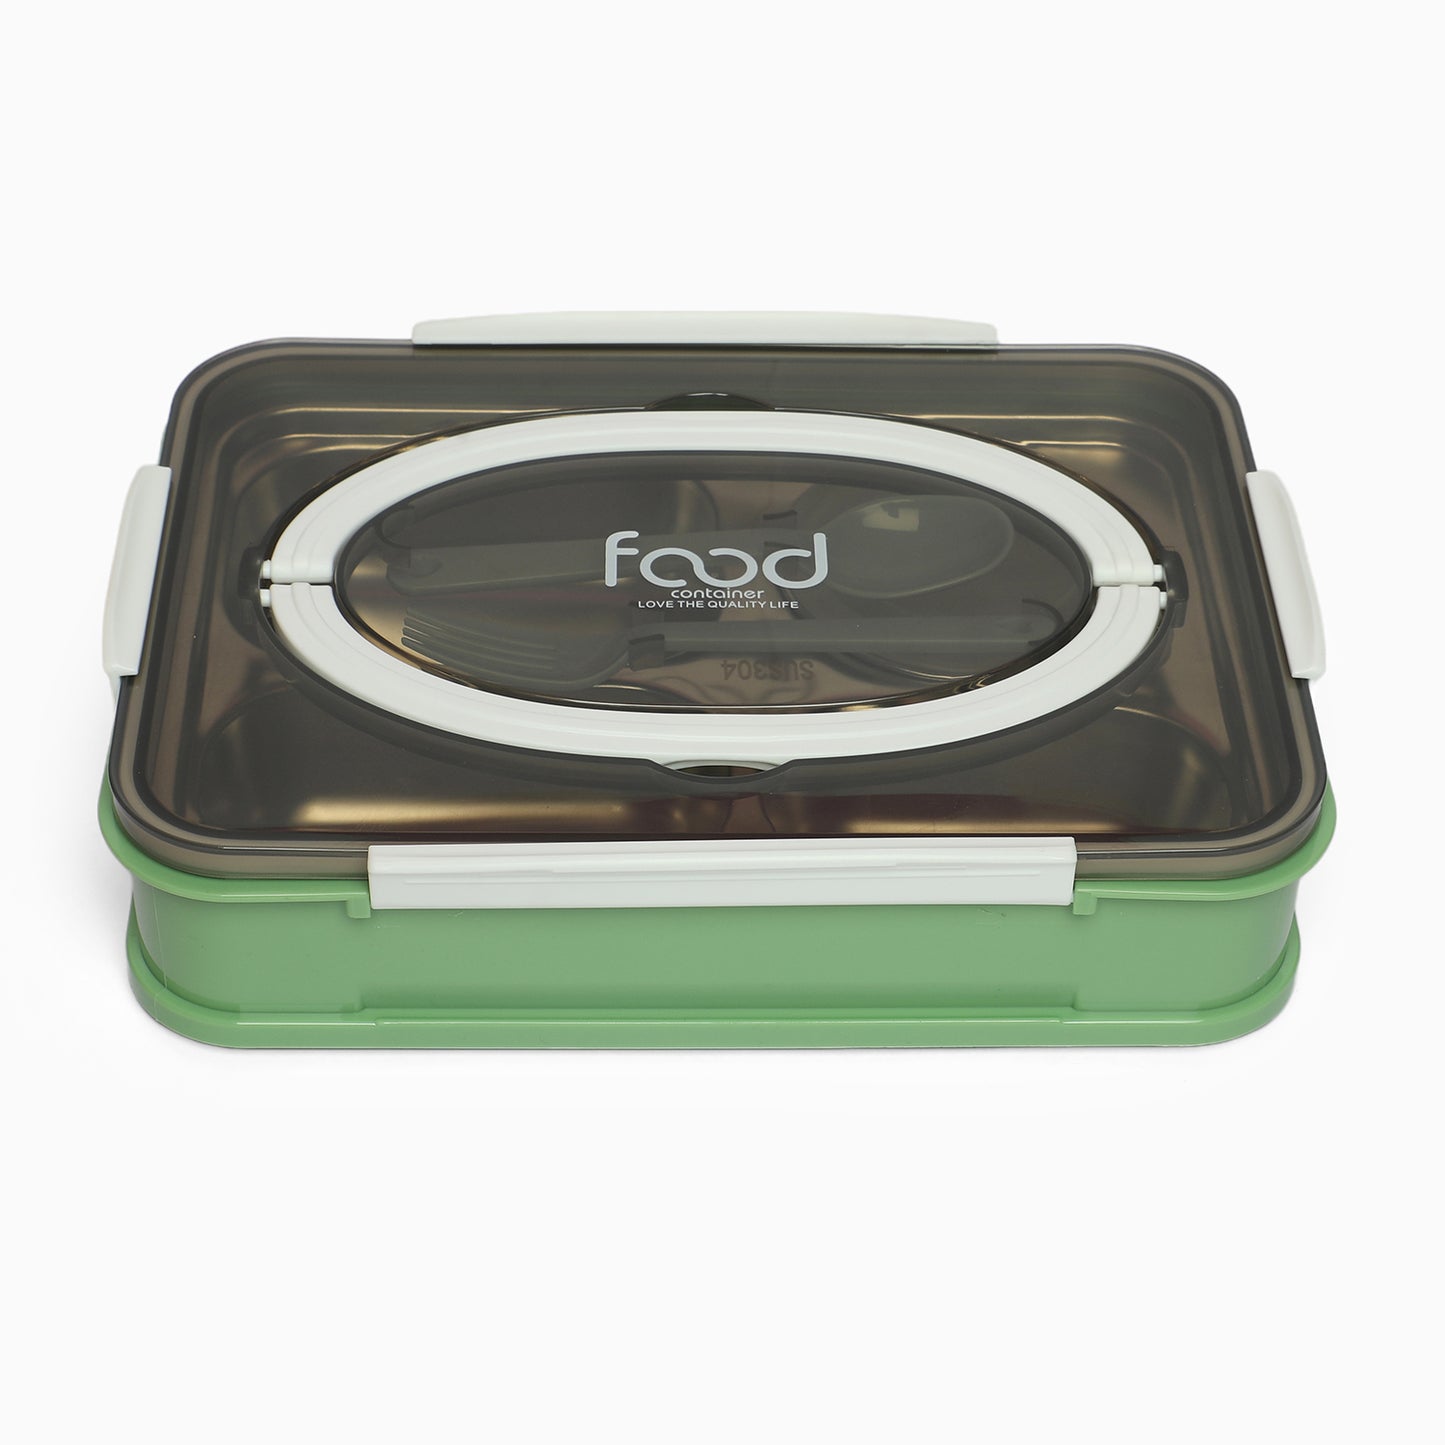 Food stainless steel 4 compartment lunchbox-1000 ml (green) - Kidspark